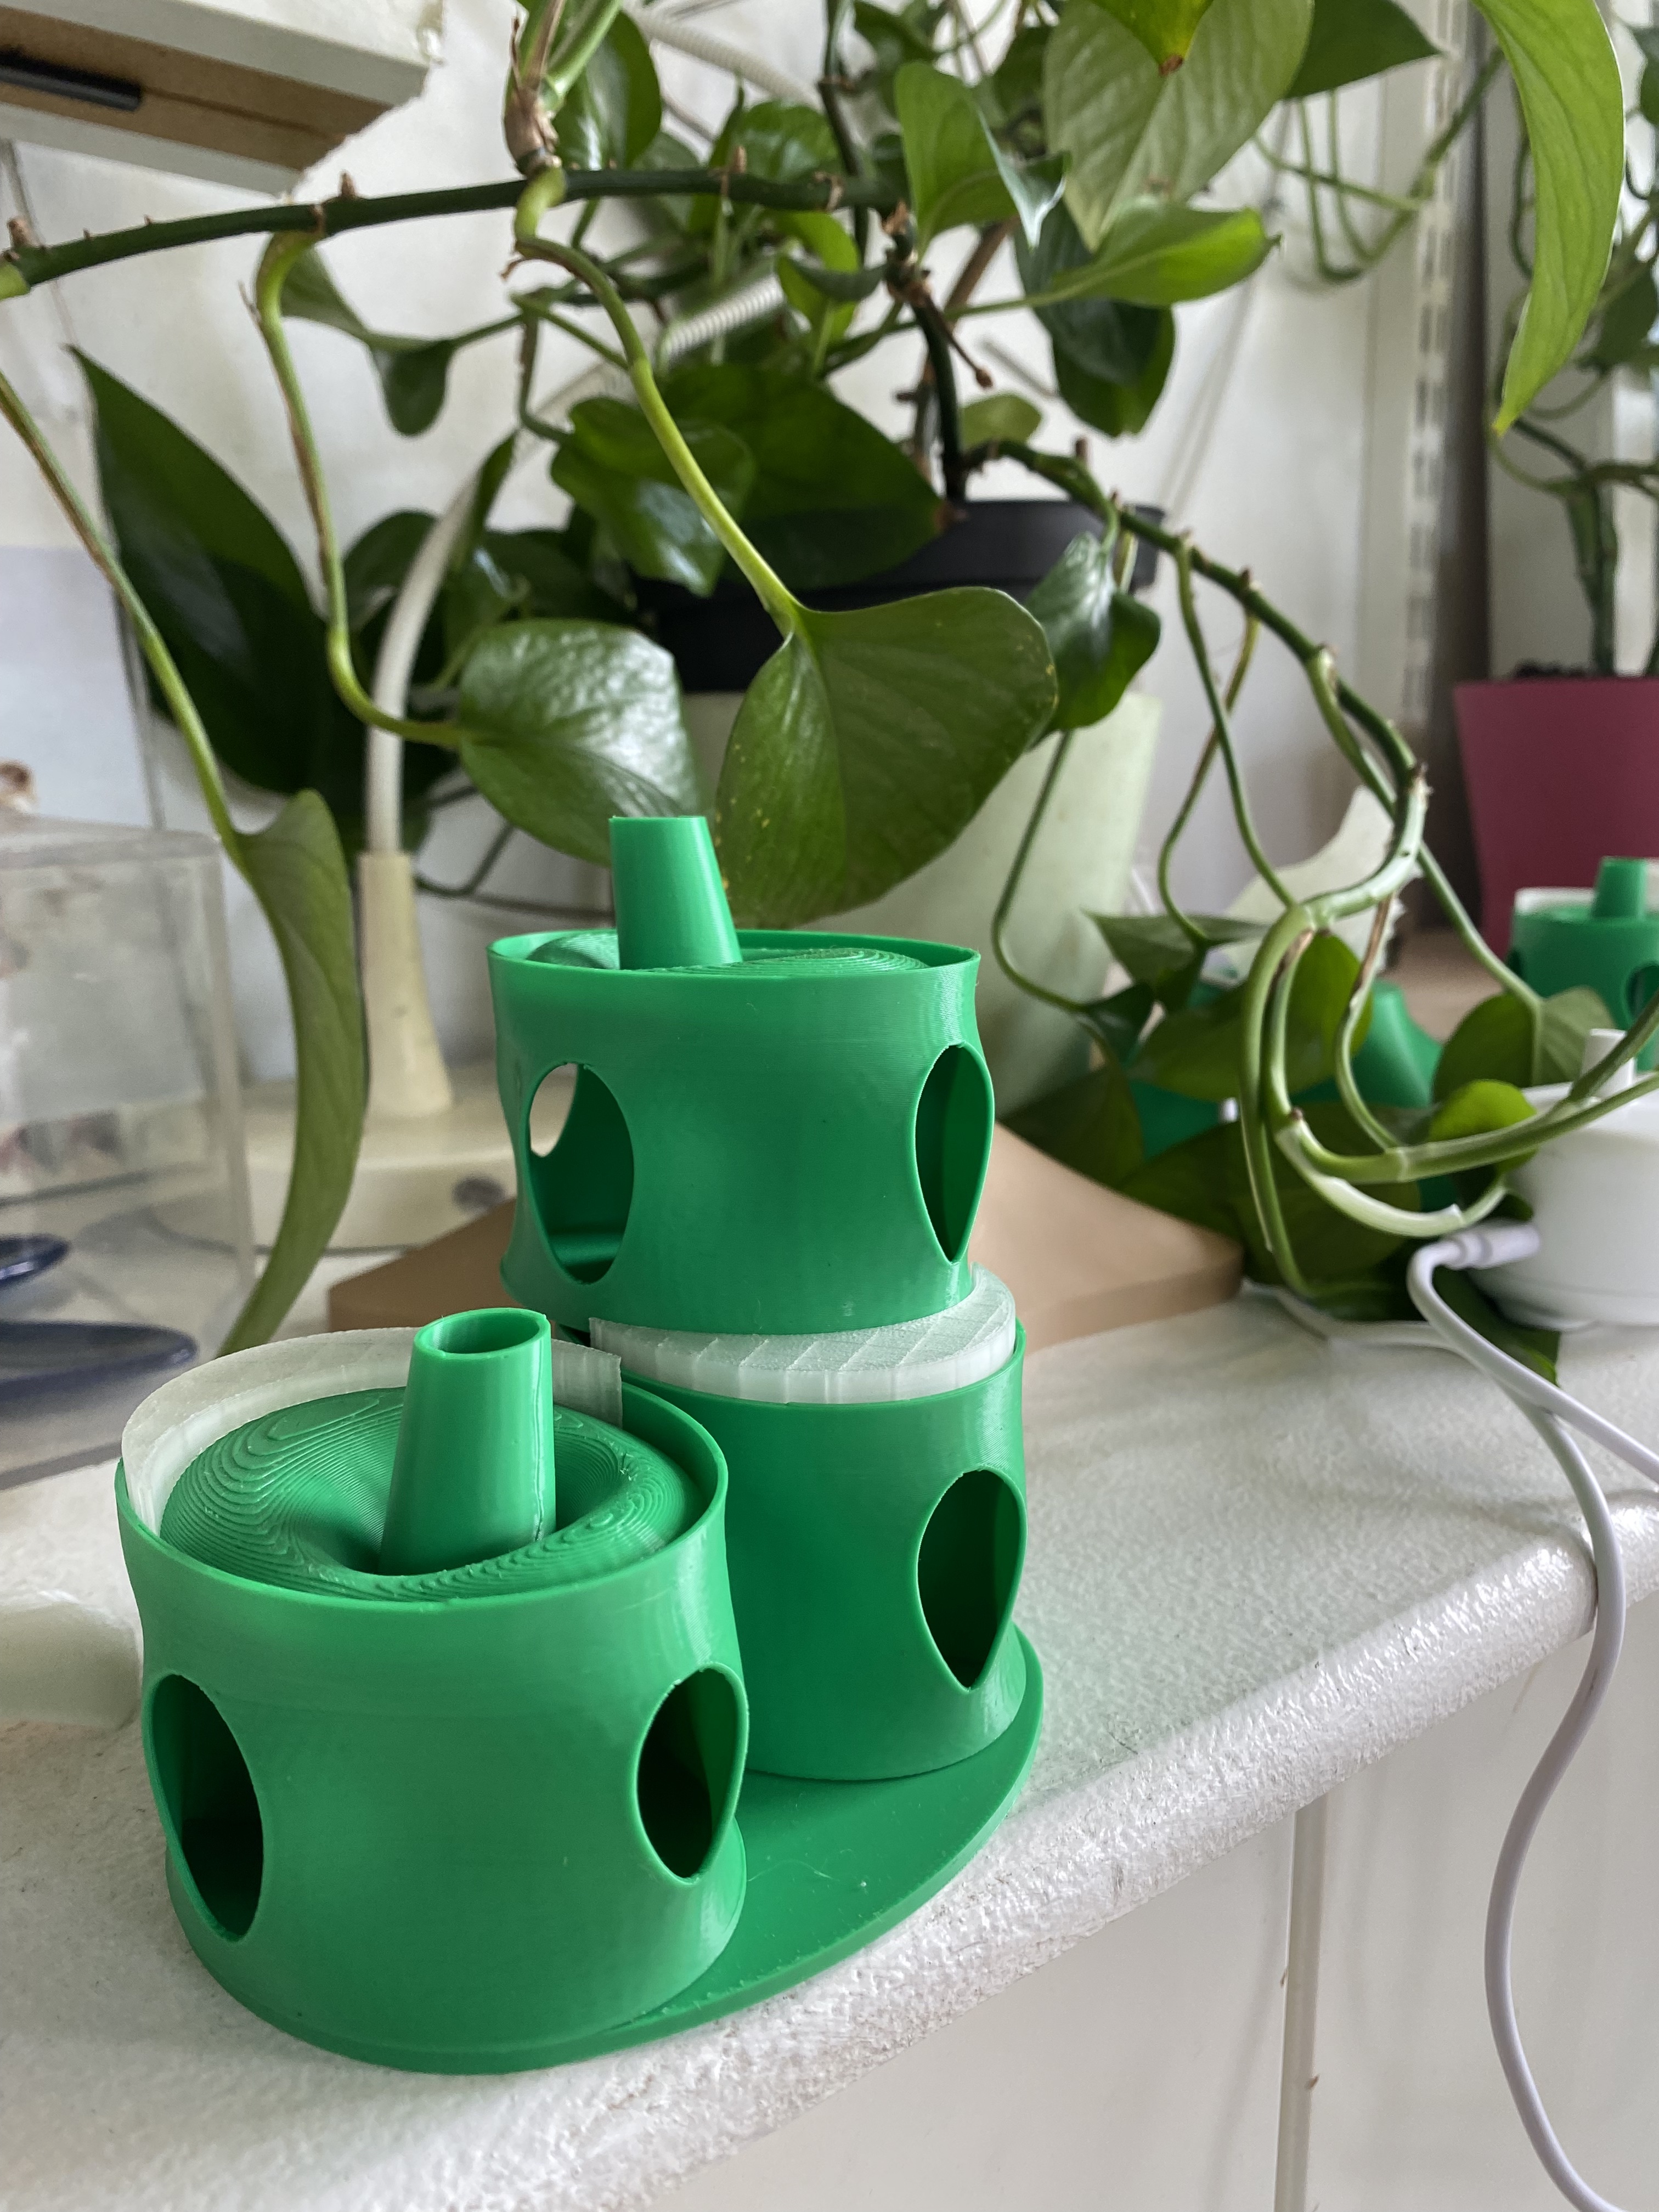 Approximately 1 inch high, green, 3D printed pods modeling a possible home for birds.